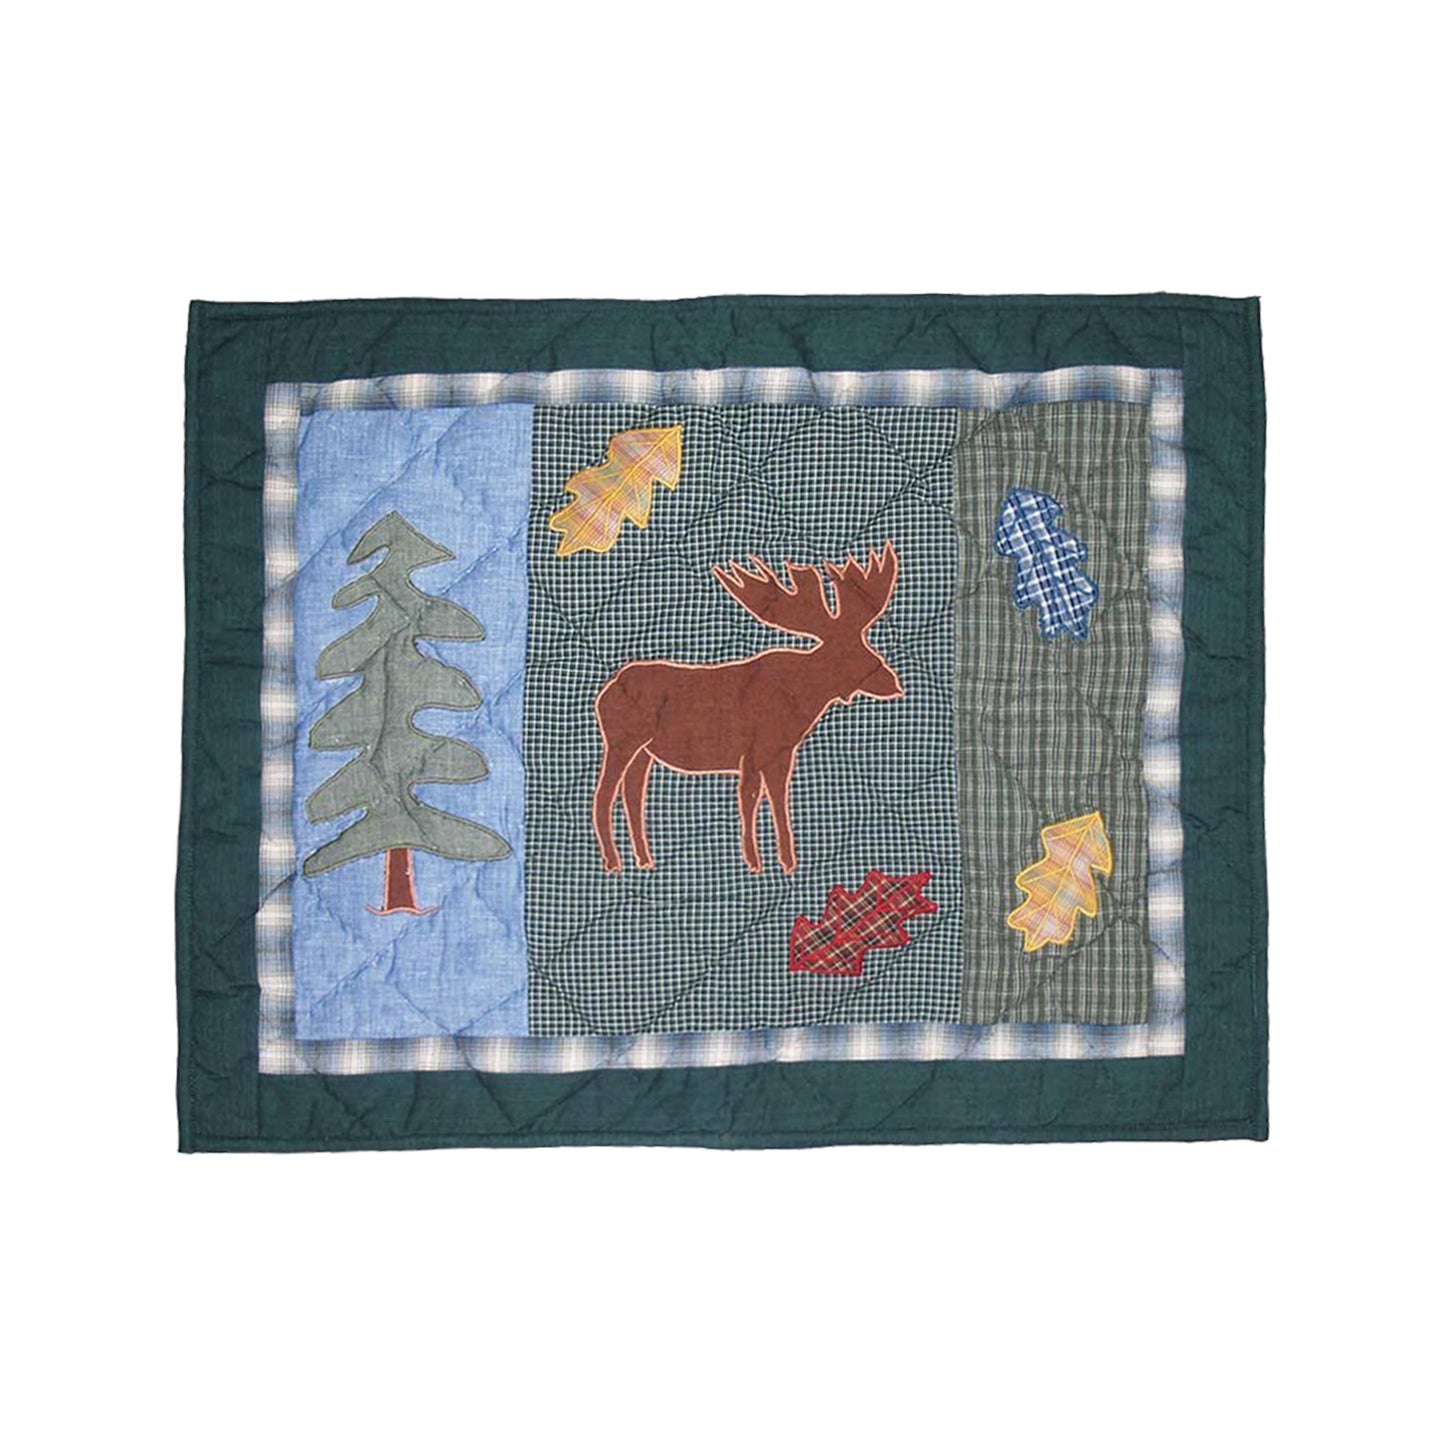 Up North Woods Quilt, Hand cut and Appliqued cotton fabric motifs.